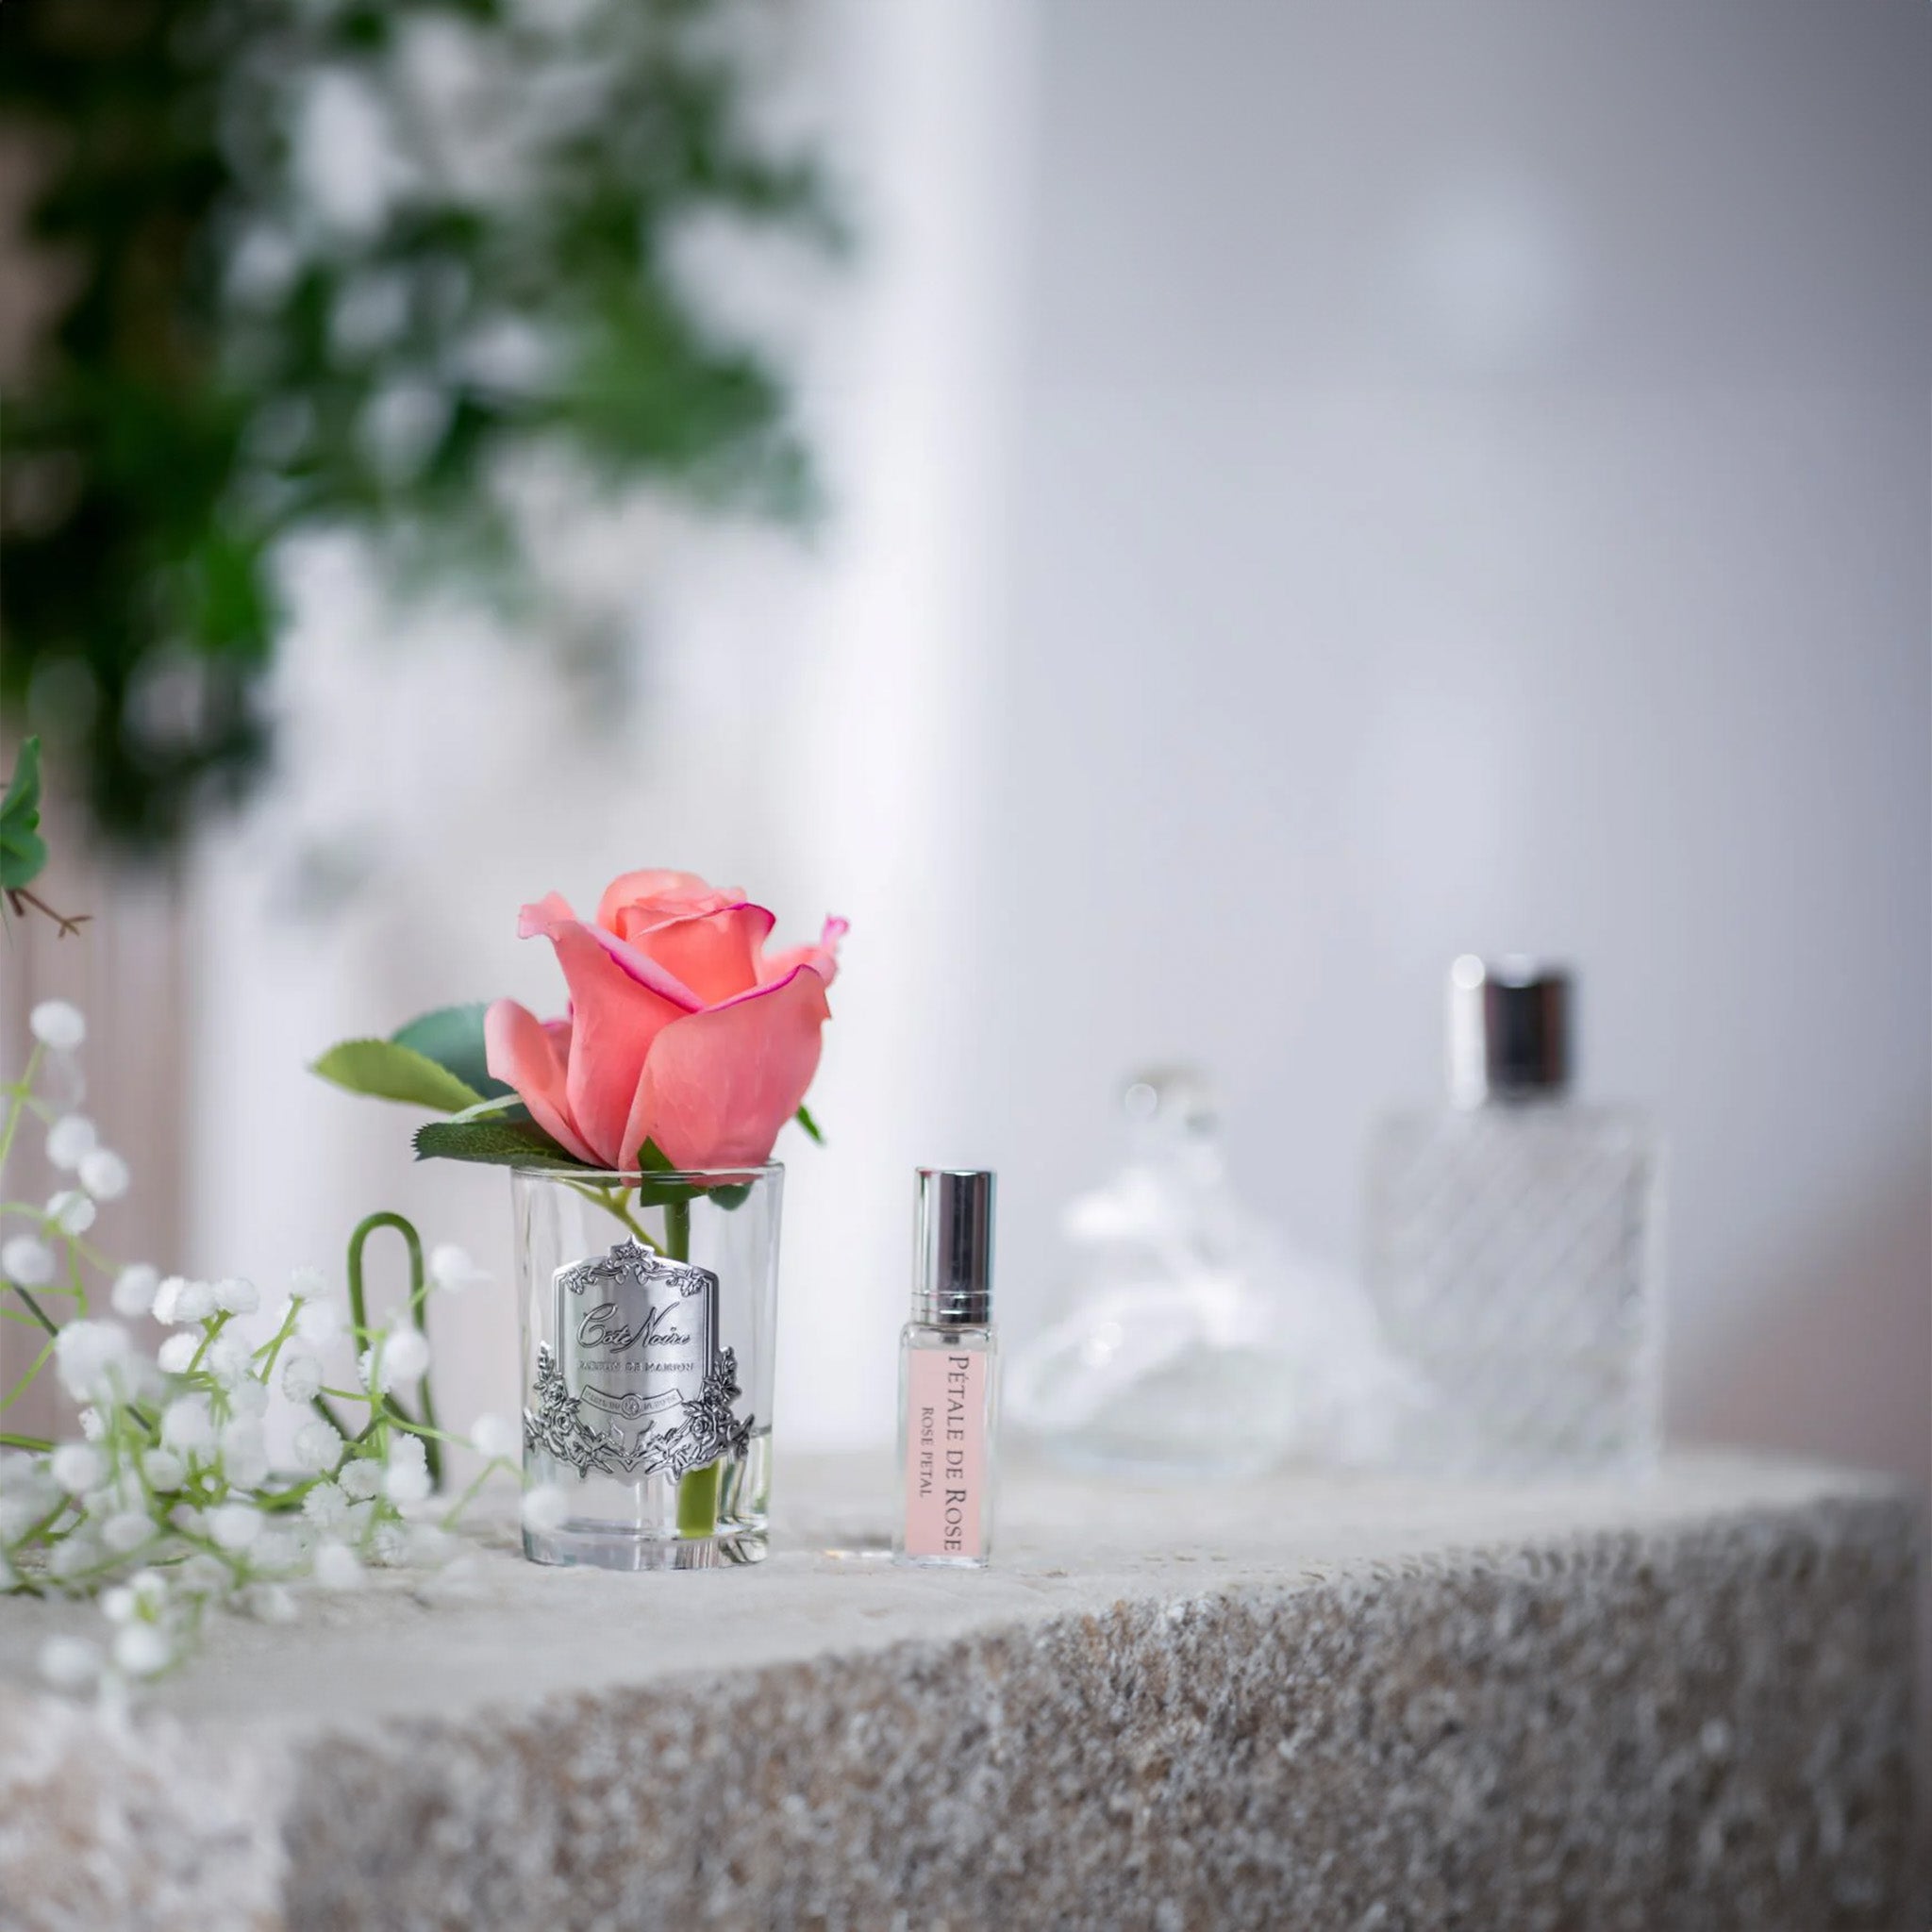 a pink rose in a glass vase next to a bottle of fragrance on a table